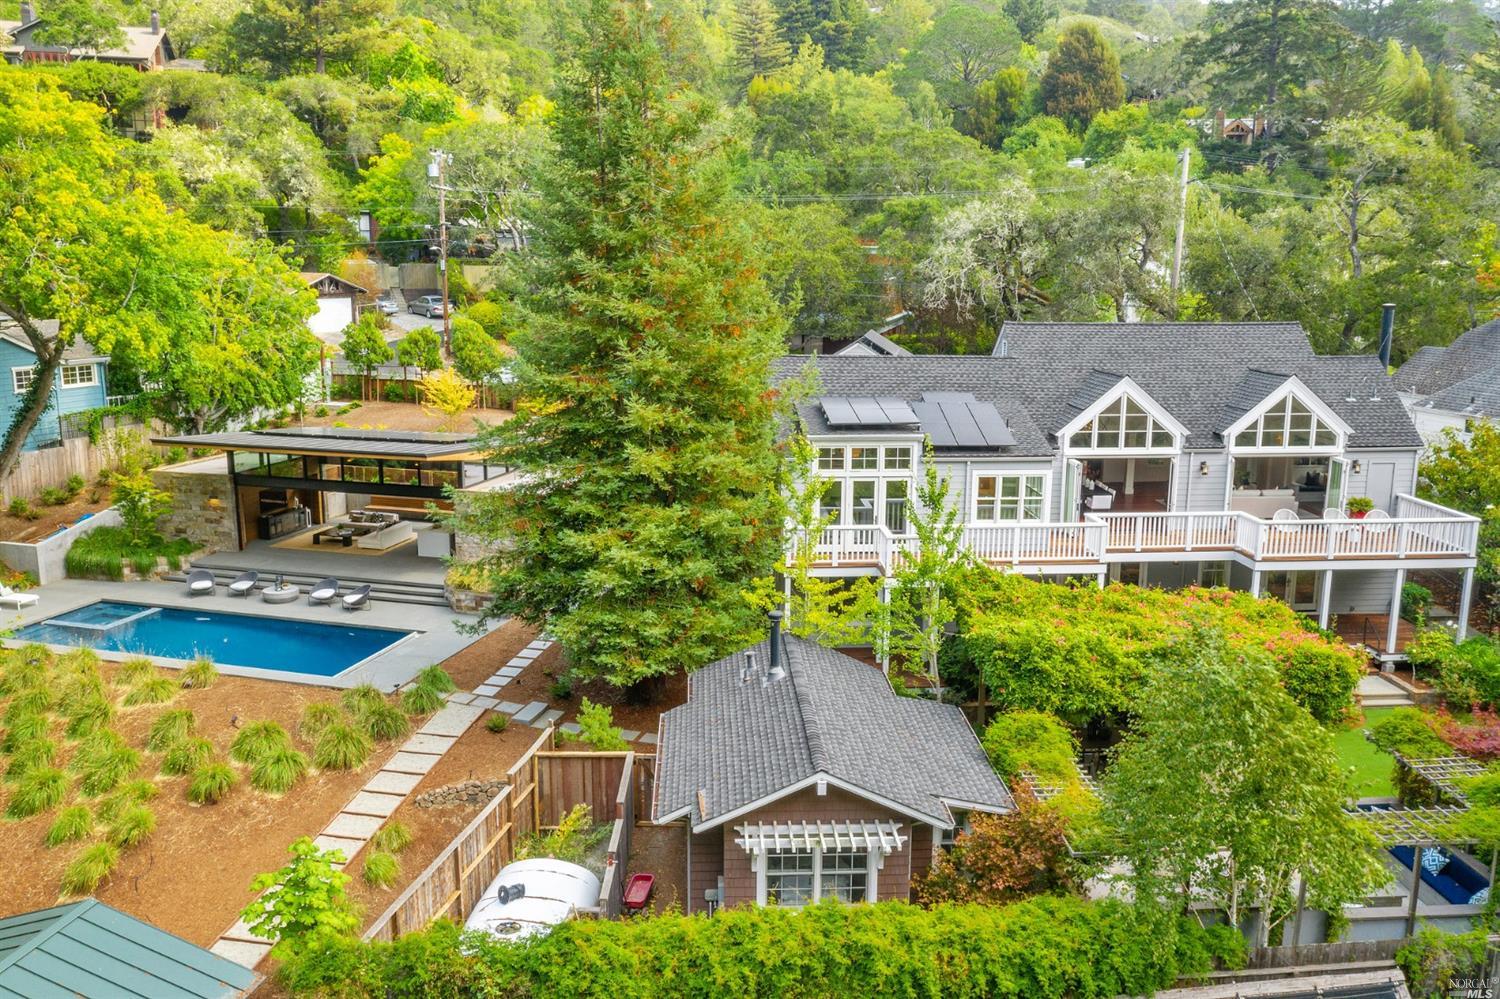 a aerial view of a house with swimming pool and large trees